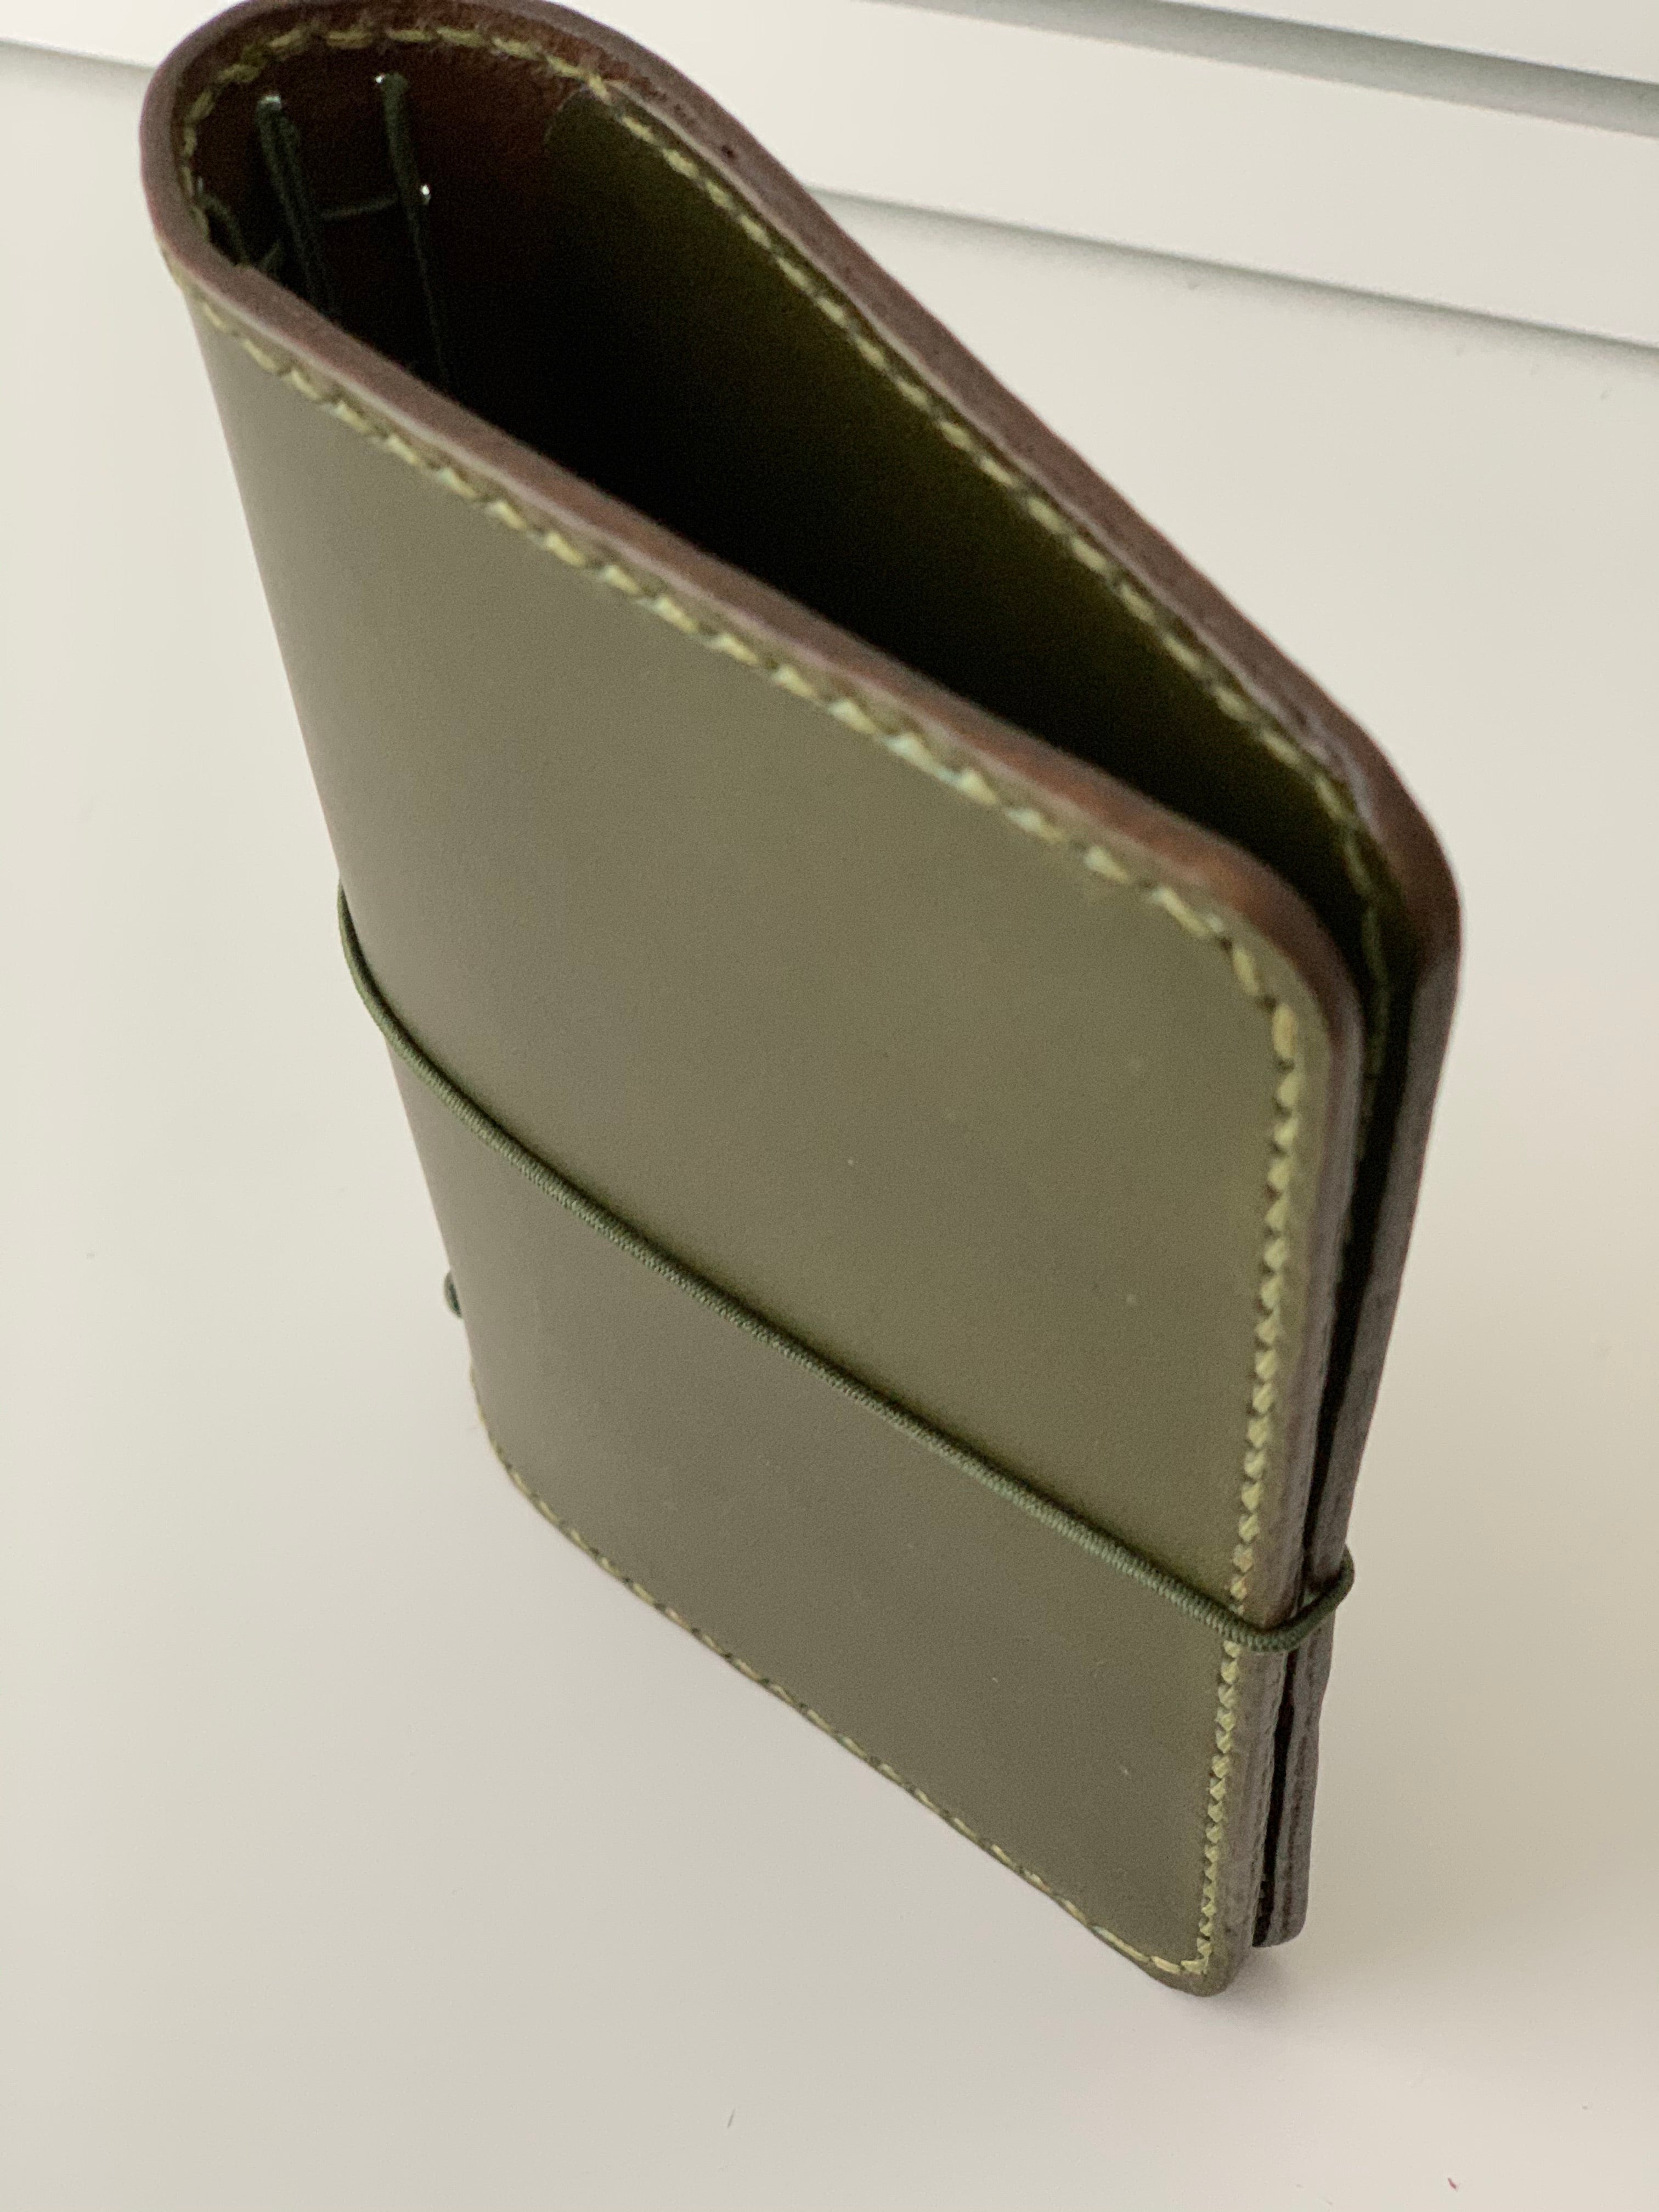 Olive Leather with Pockets